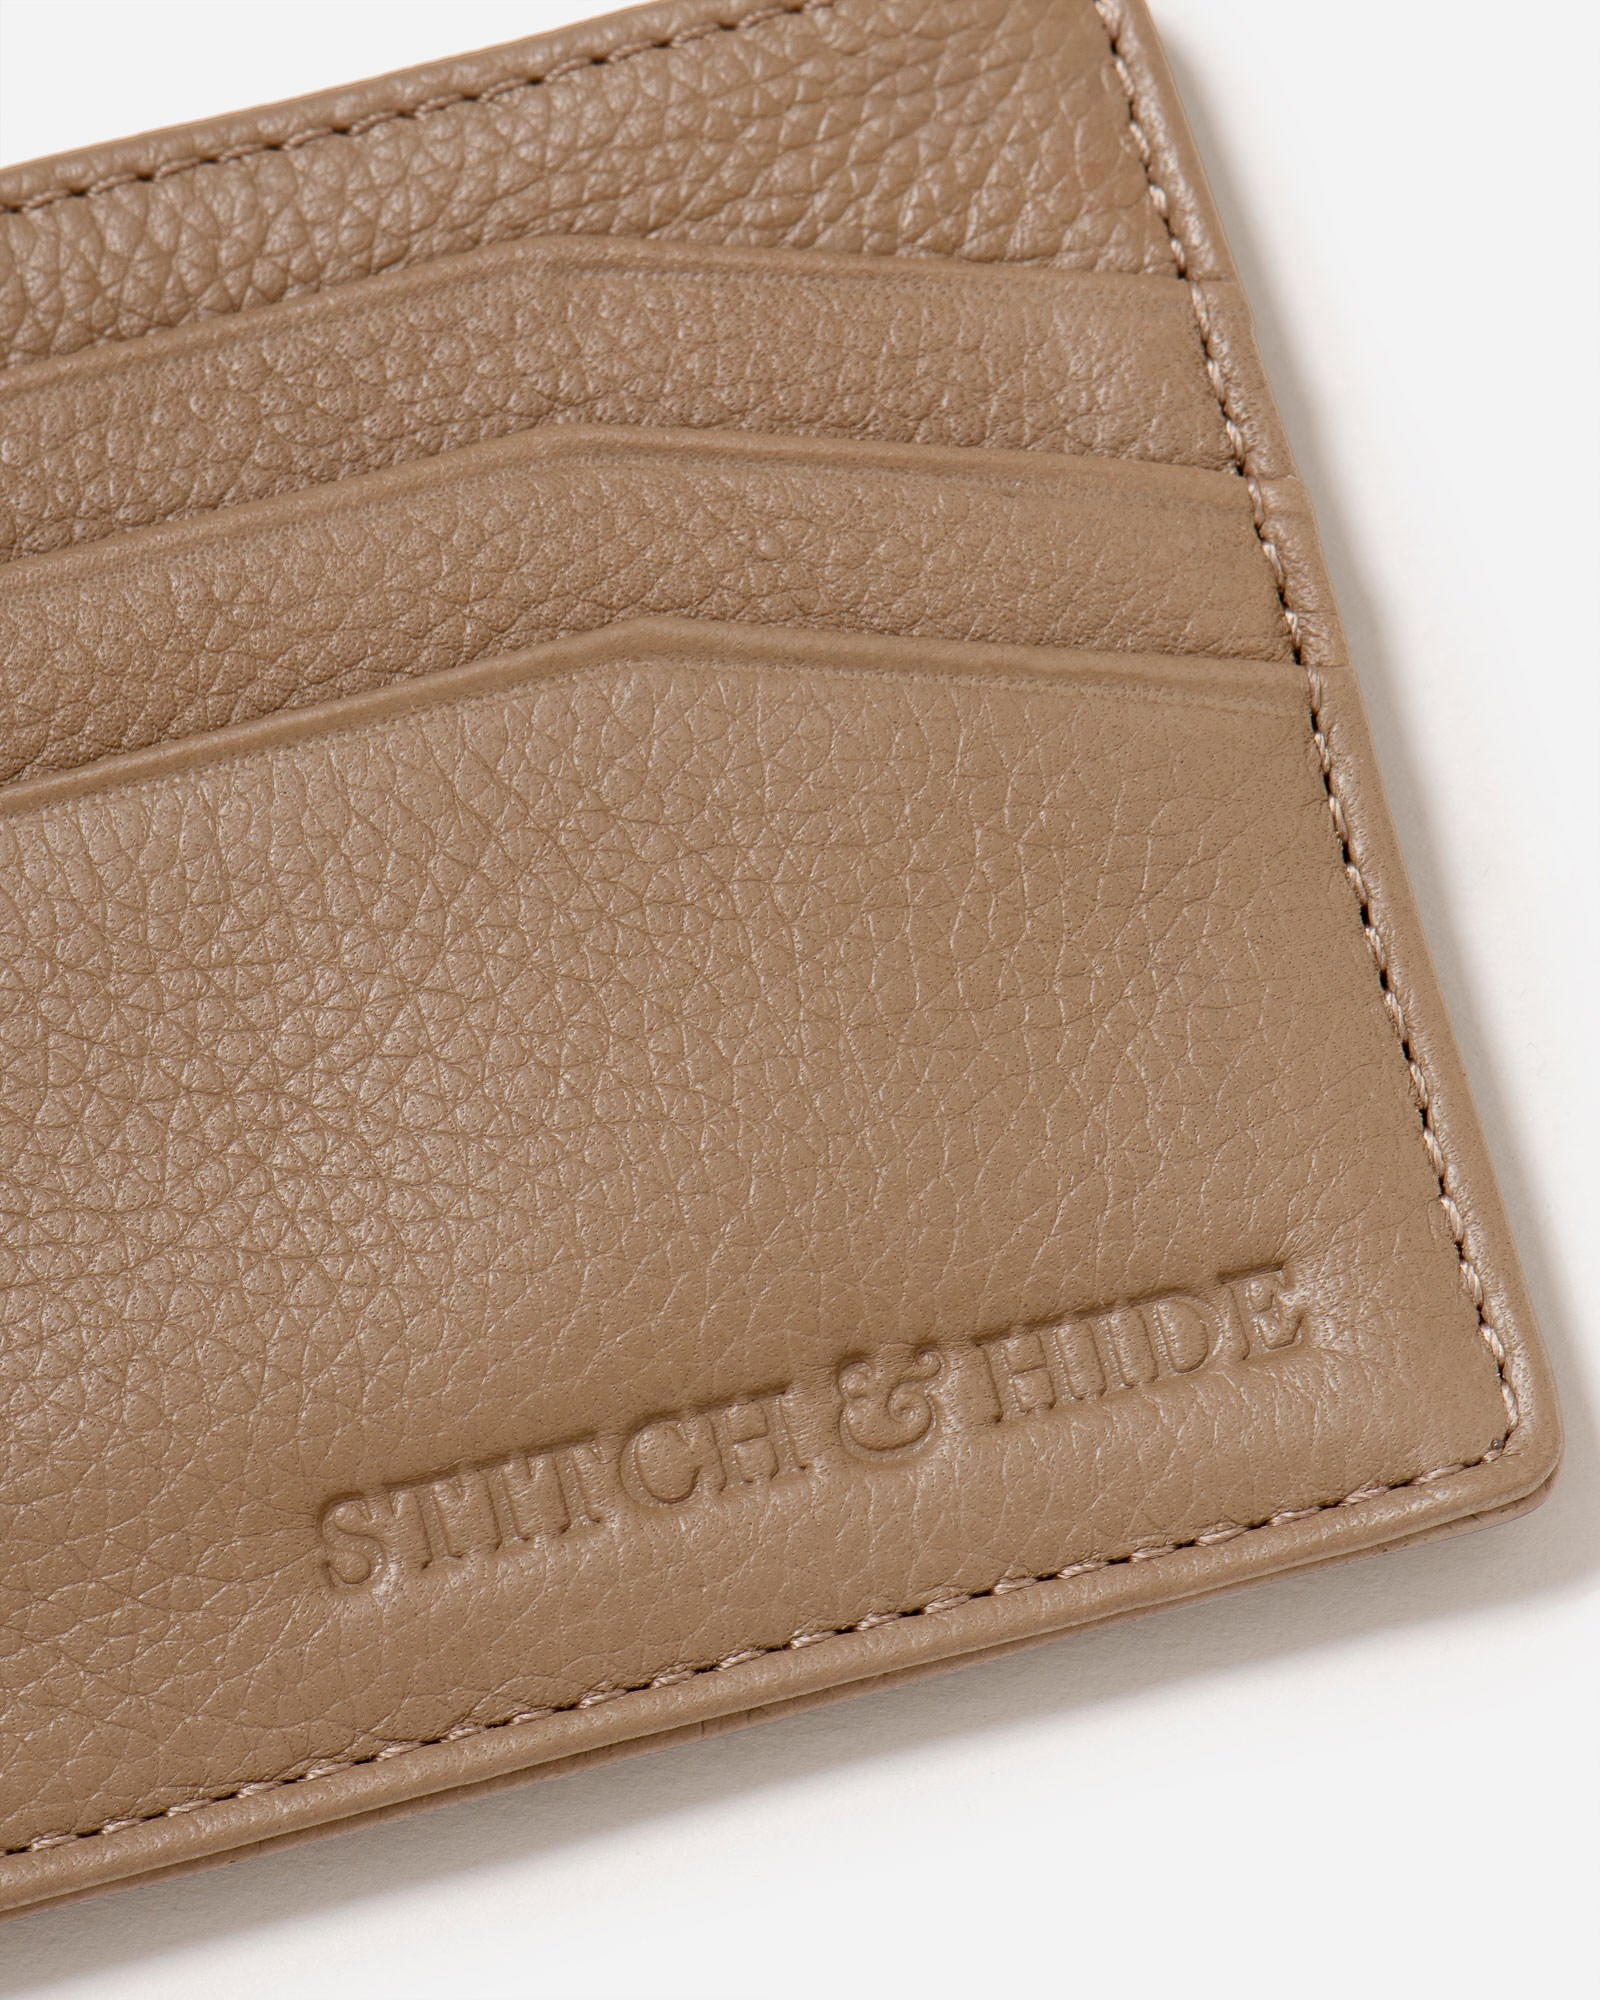 Alice Cardholder - Stitch & Hide Handbags, Wallets & Cases Stitch and Hide 